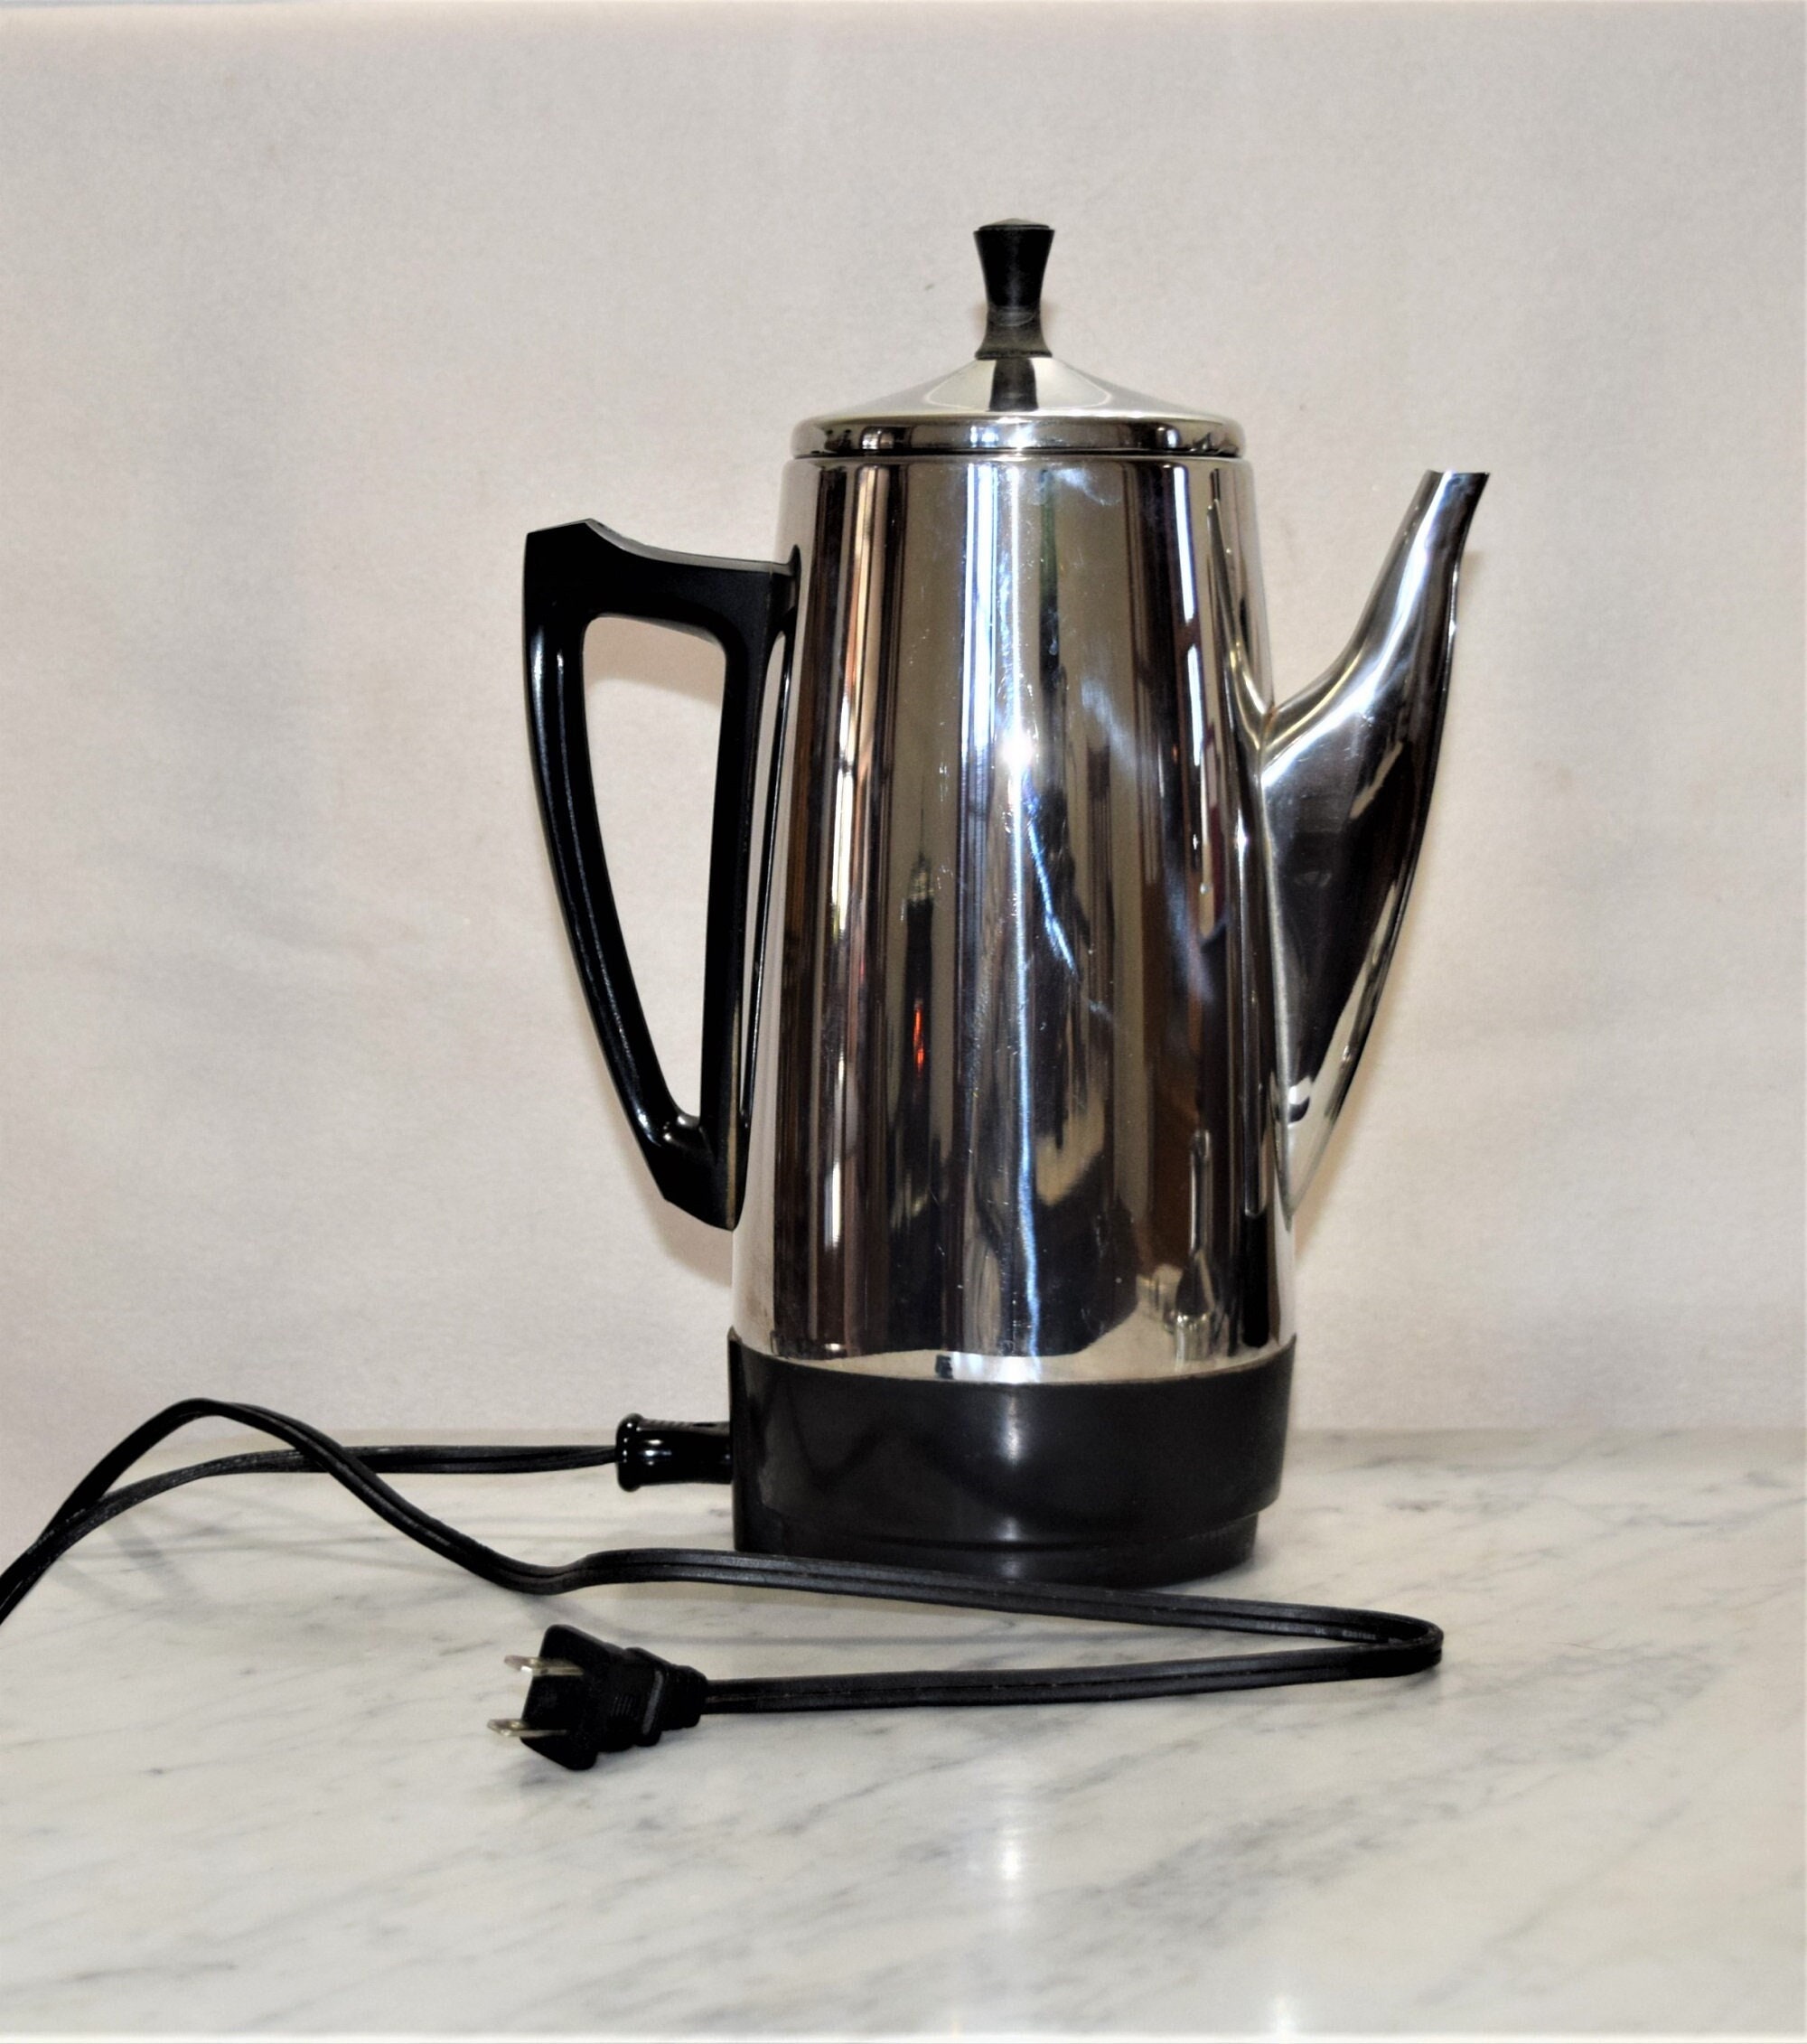 Presto 12 Cup Coffee Maker Percolator Stainless Steel 0281105 